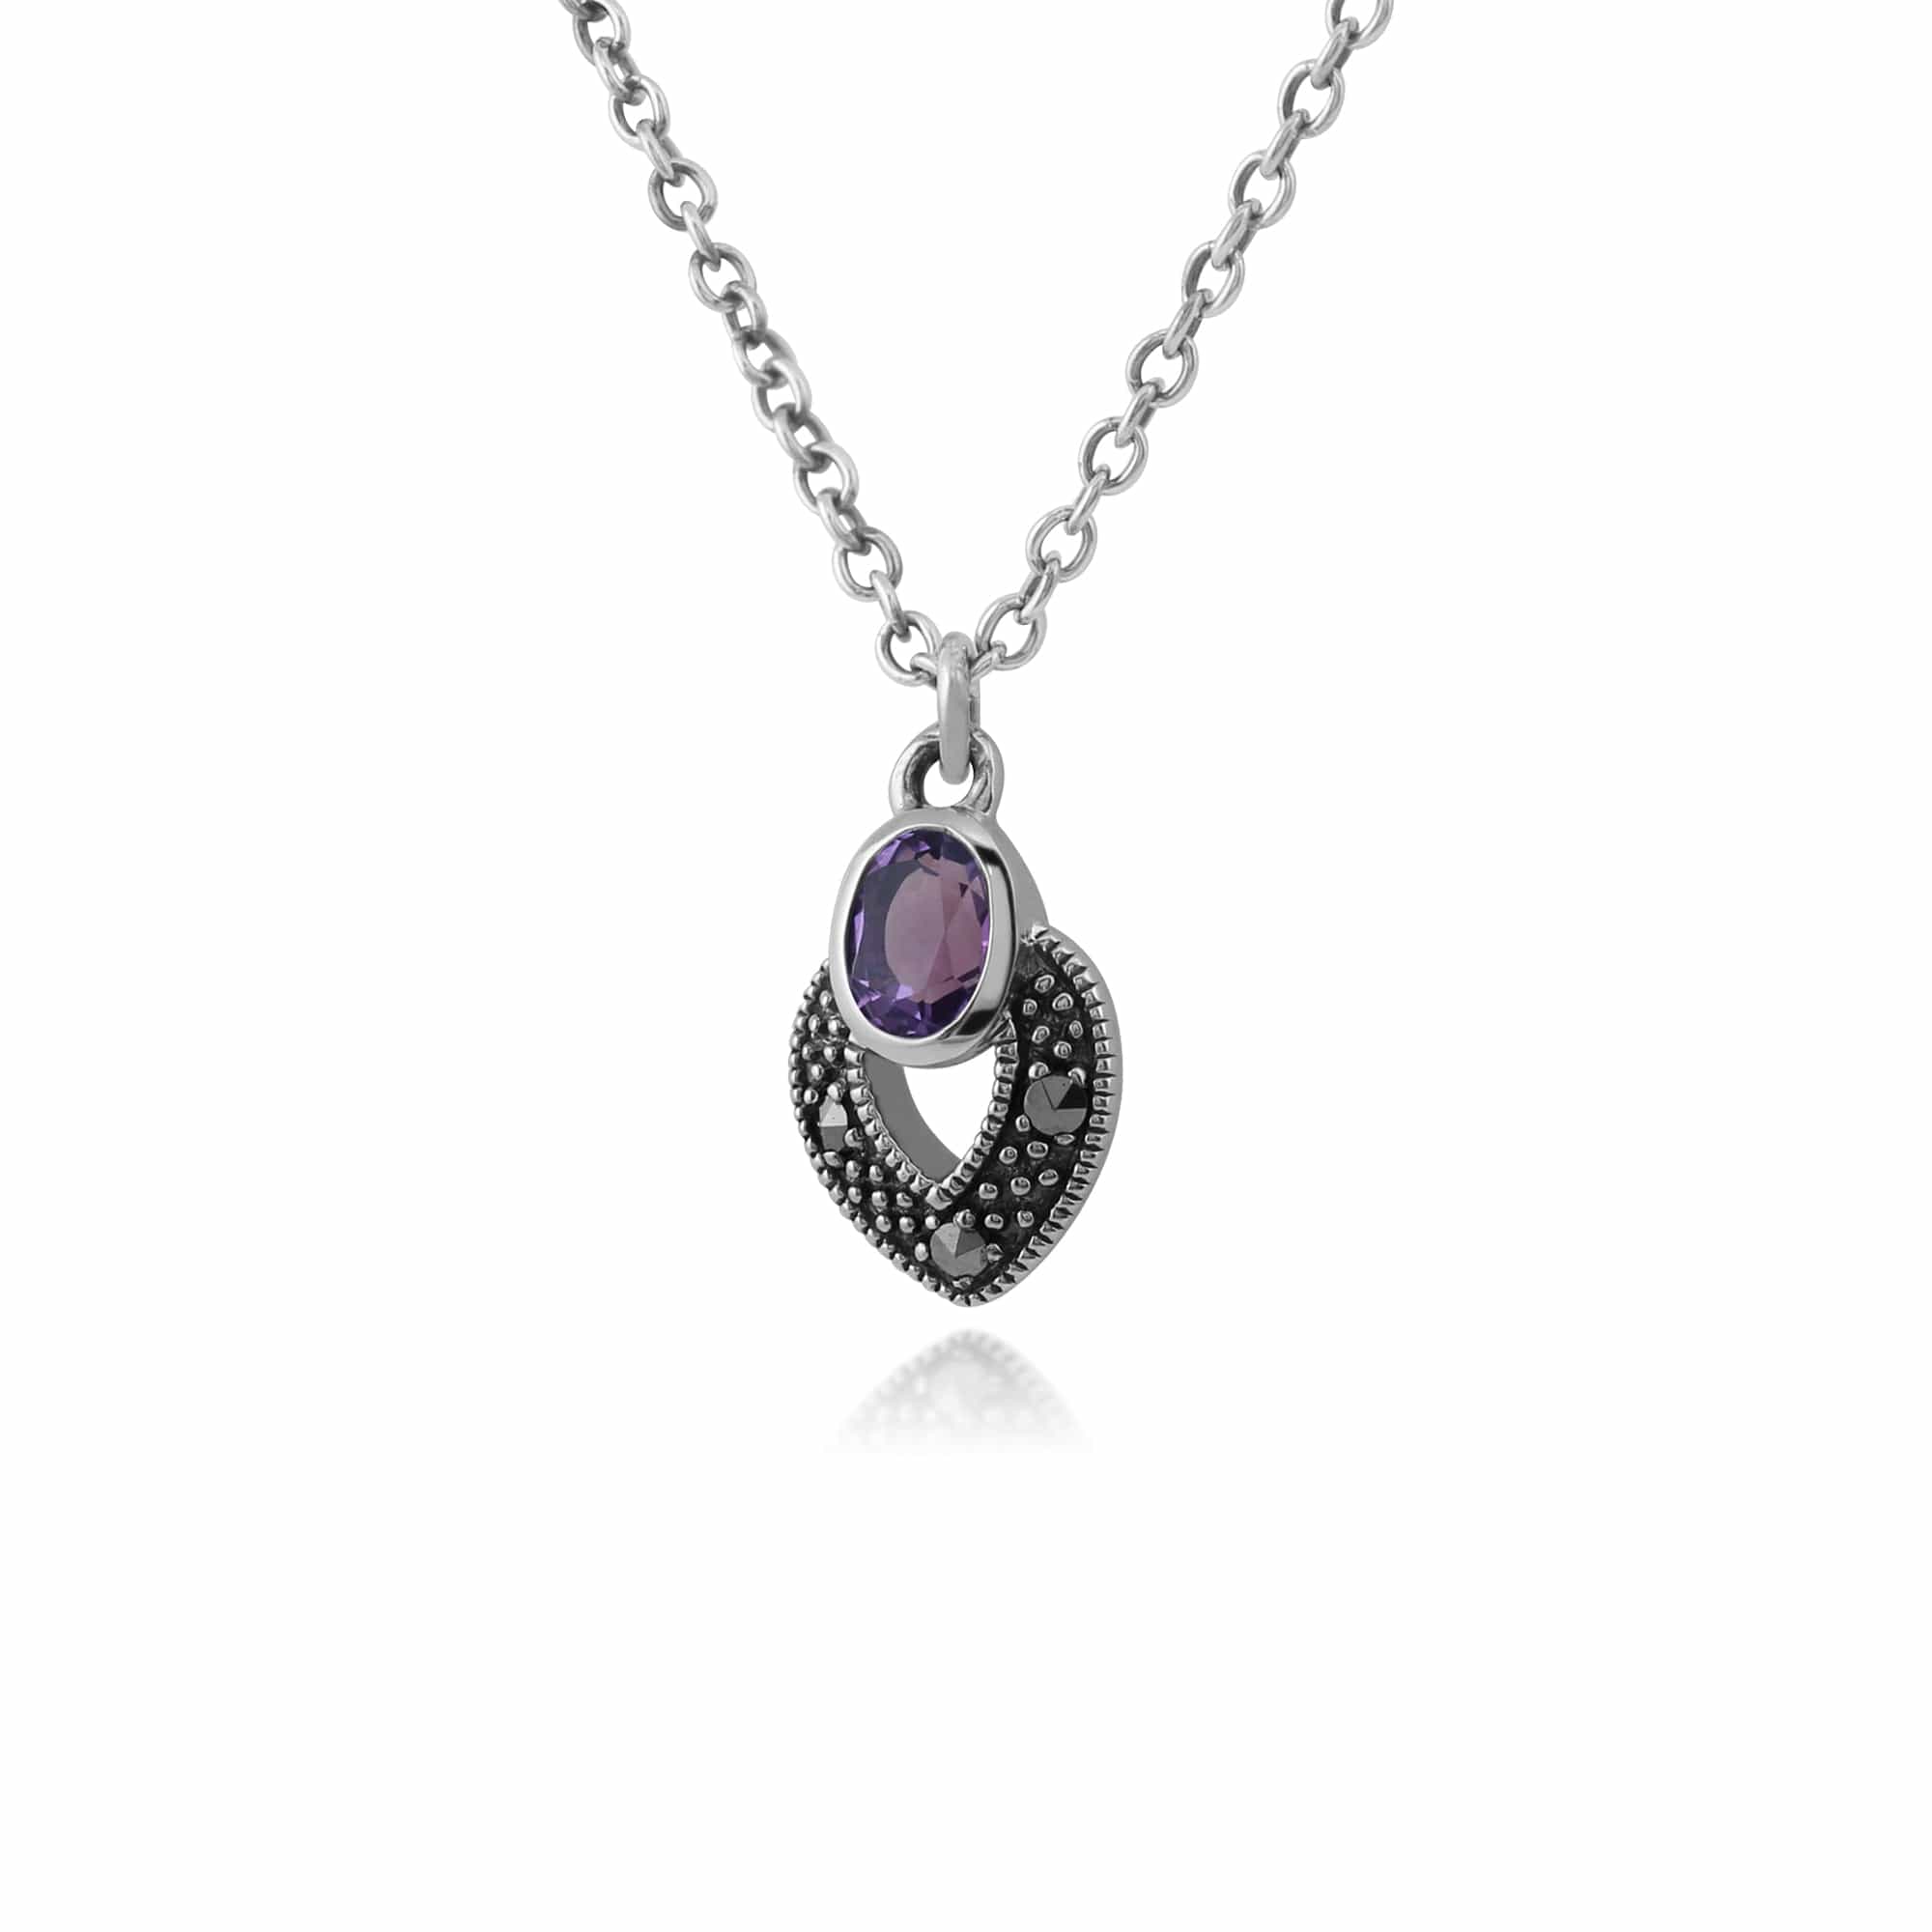 214N688204925 Art Deco Style Oval Amethyst & Marcasite Necklace in 925 Sterling Silver 2